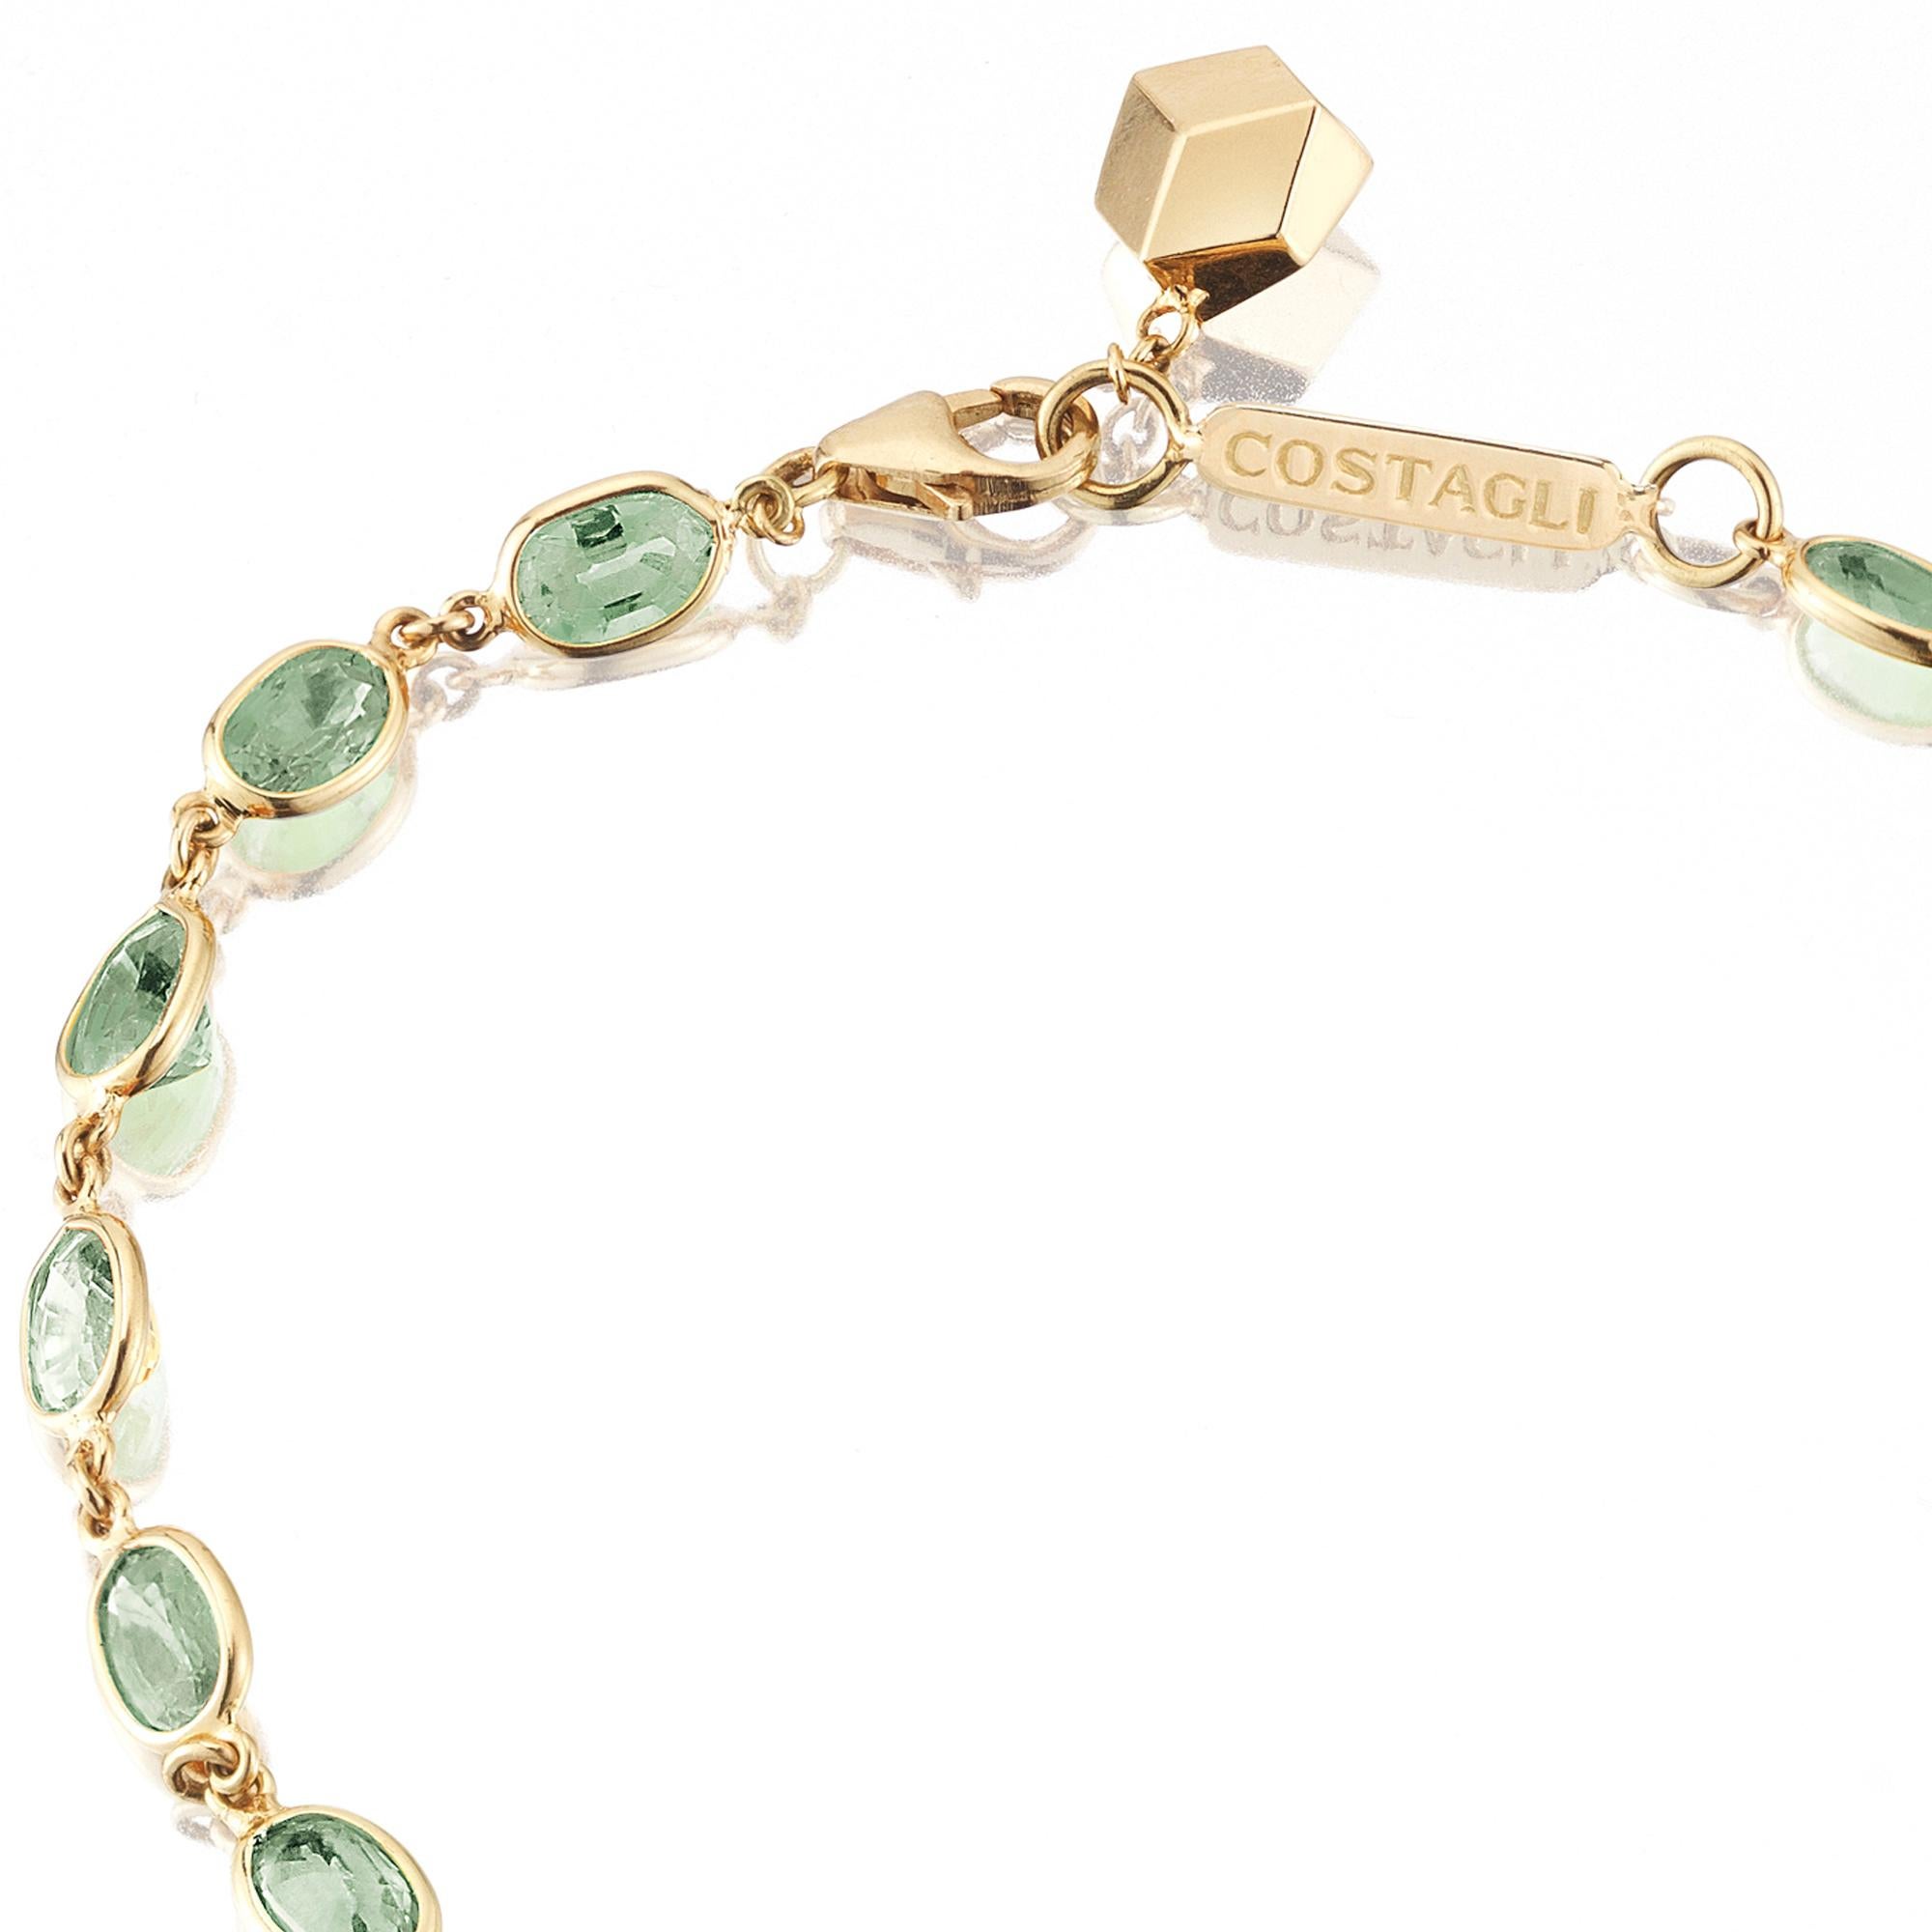 Contemporary Paolo Costagli 18 Karat Yellow Gold Green Sapphire 8.50 Carat Ombre Bracelet For Sale